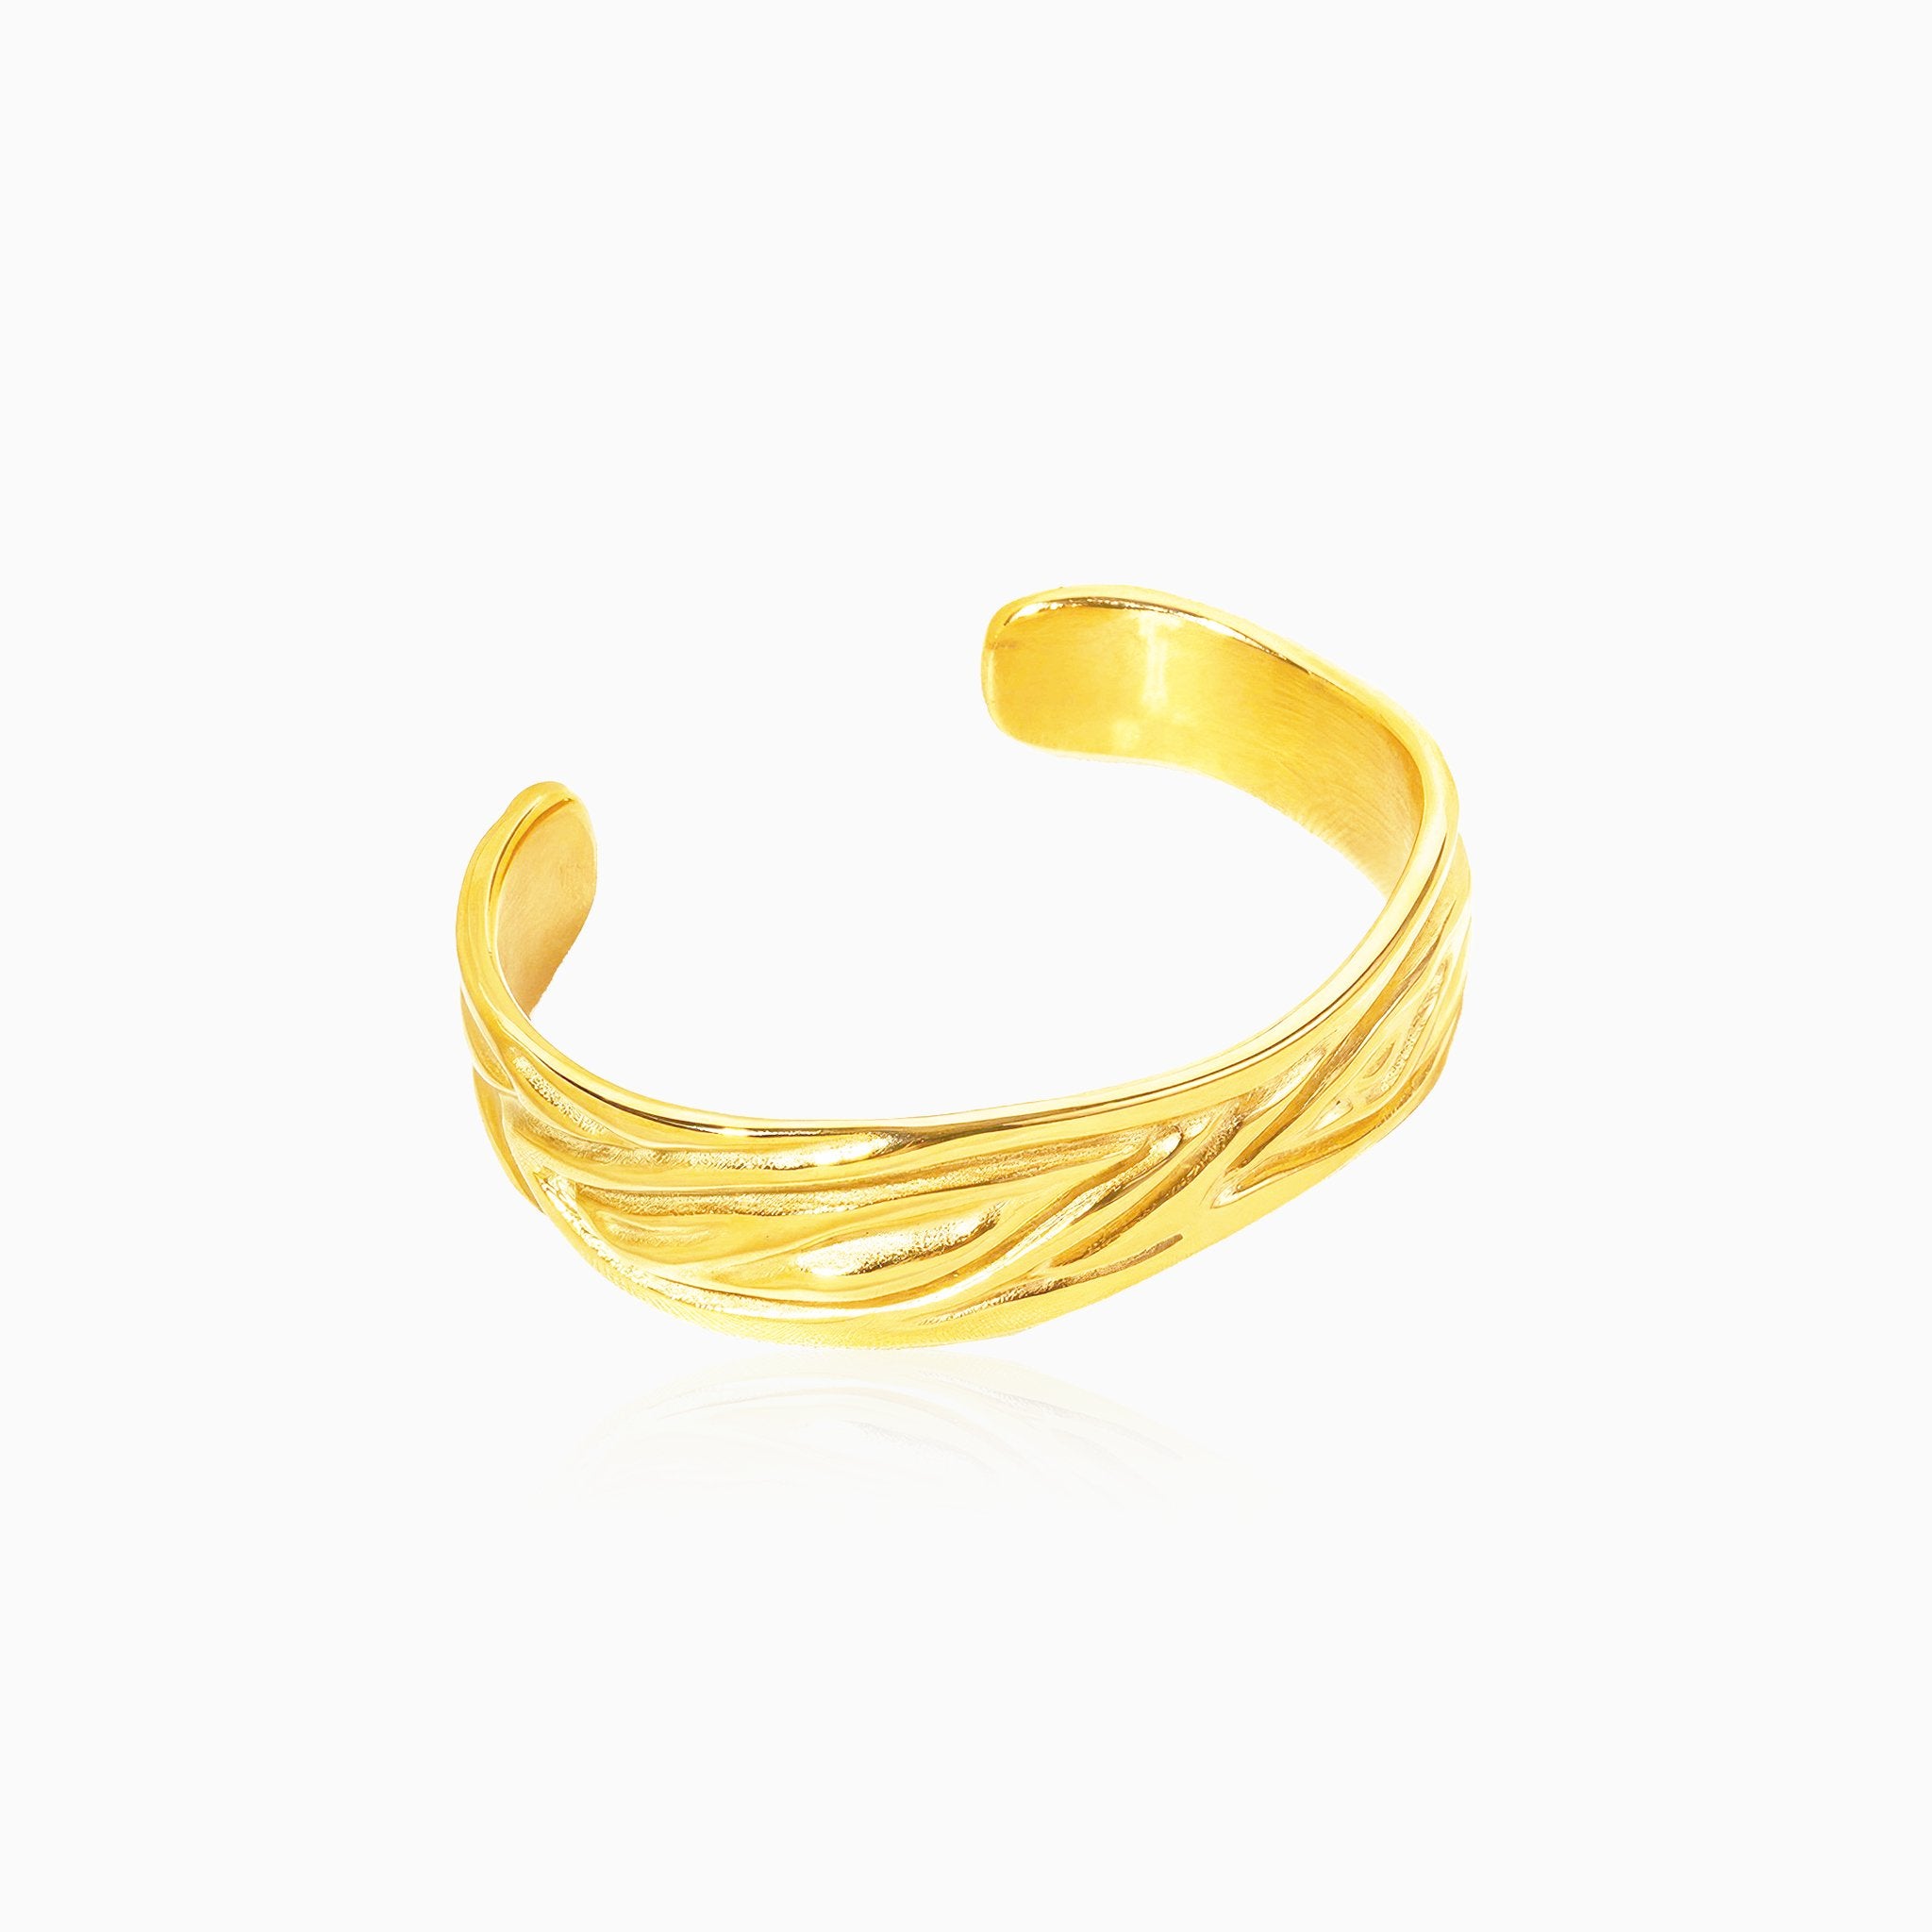 Wrinkle Texture Cuff Bracelet - Nobbier - Bracelet - 18K Gold And Titanium PVD Coated Jewelry